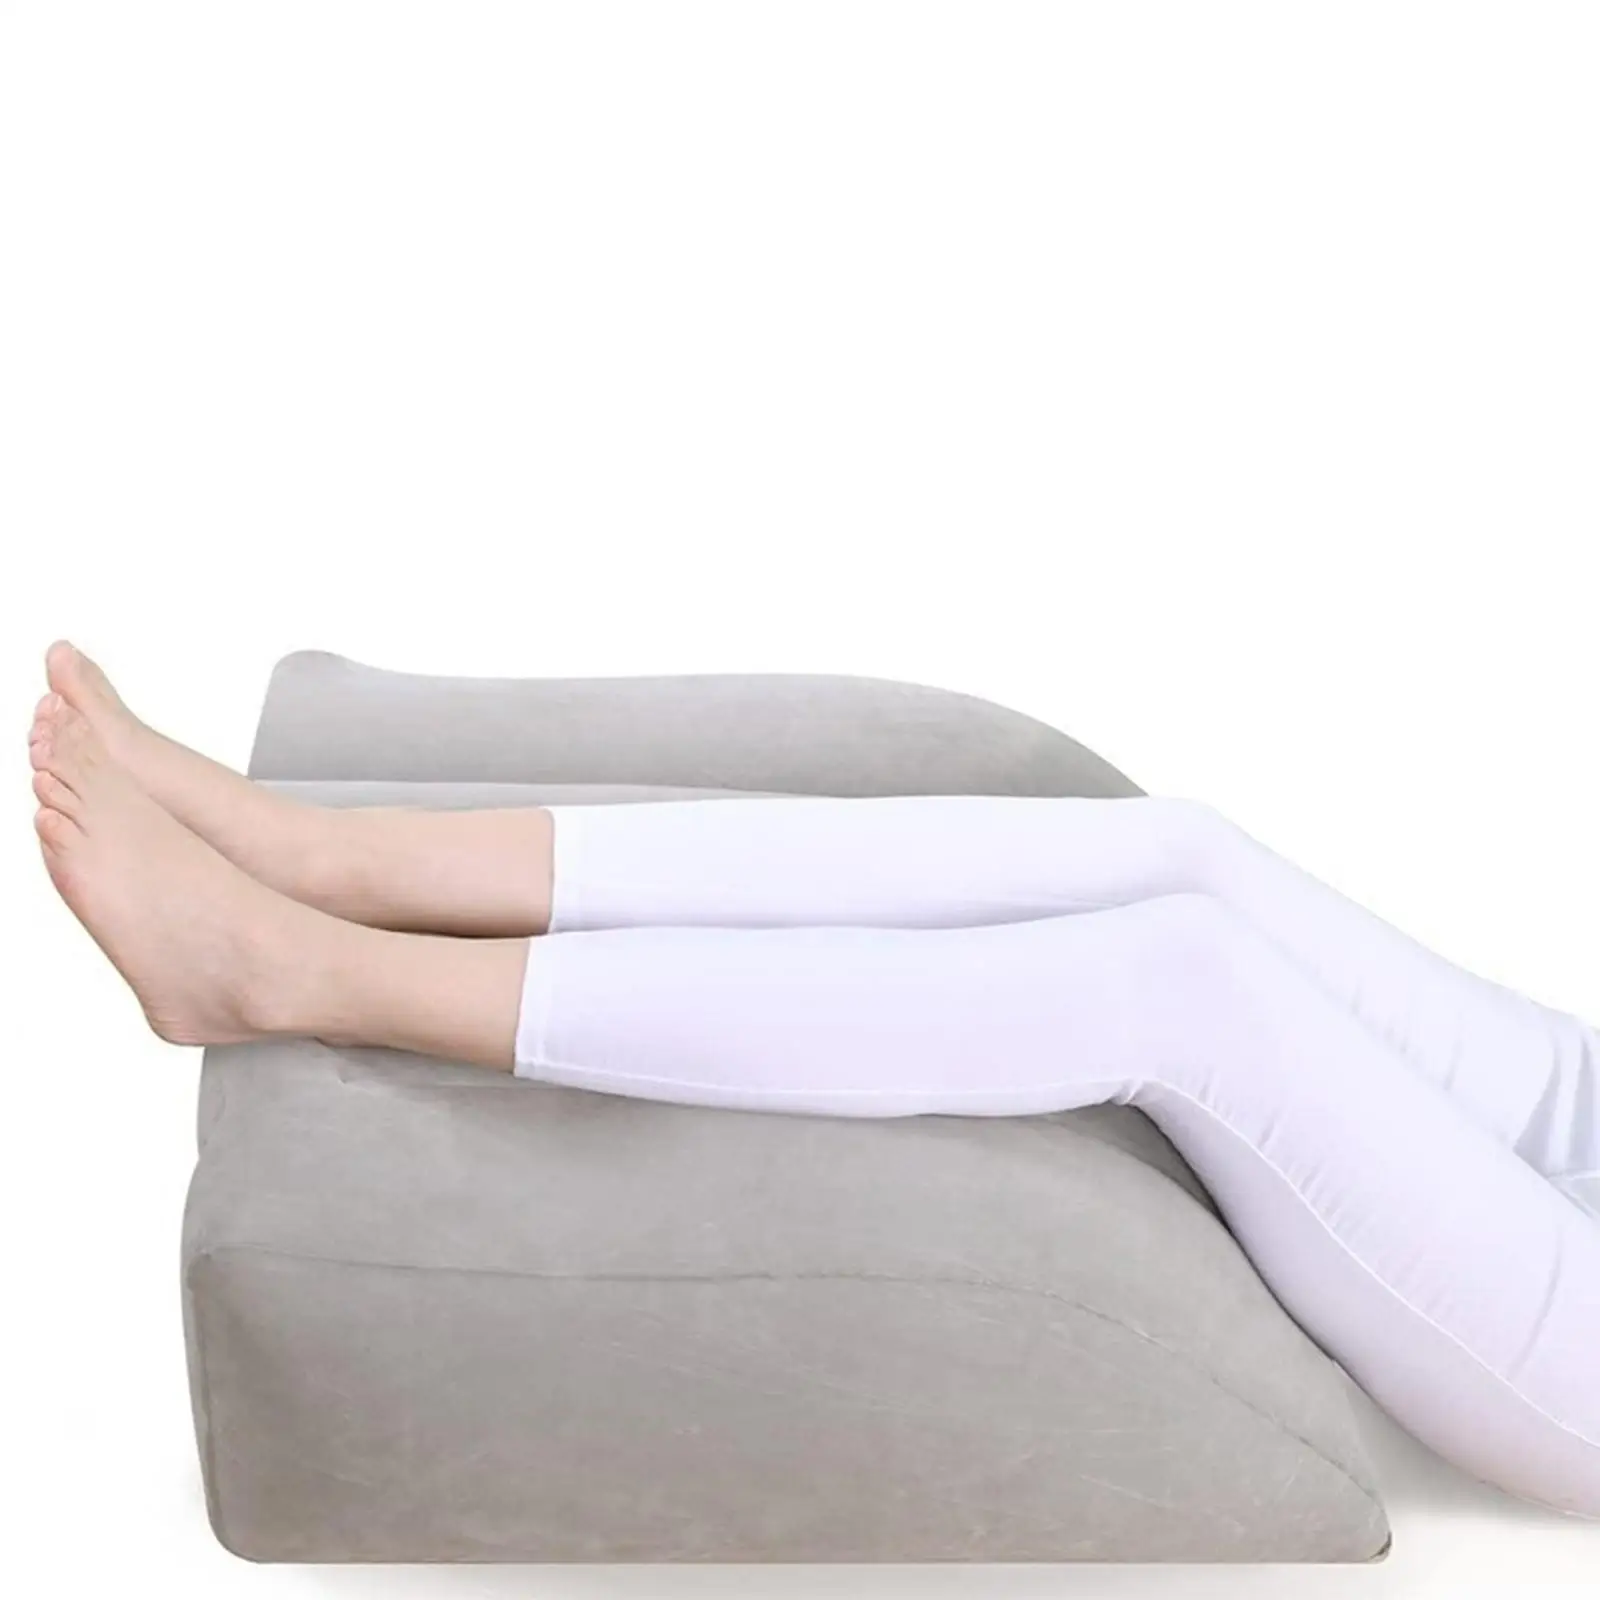 Leg Elevation Pillow Lower Back Feet Elevation Pillow Inflatable Leg Pillow Comfort Leg Pillow for Relax Bed Reading Car Travel